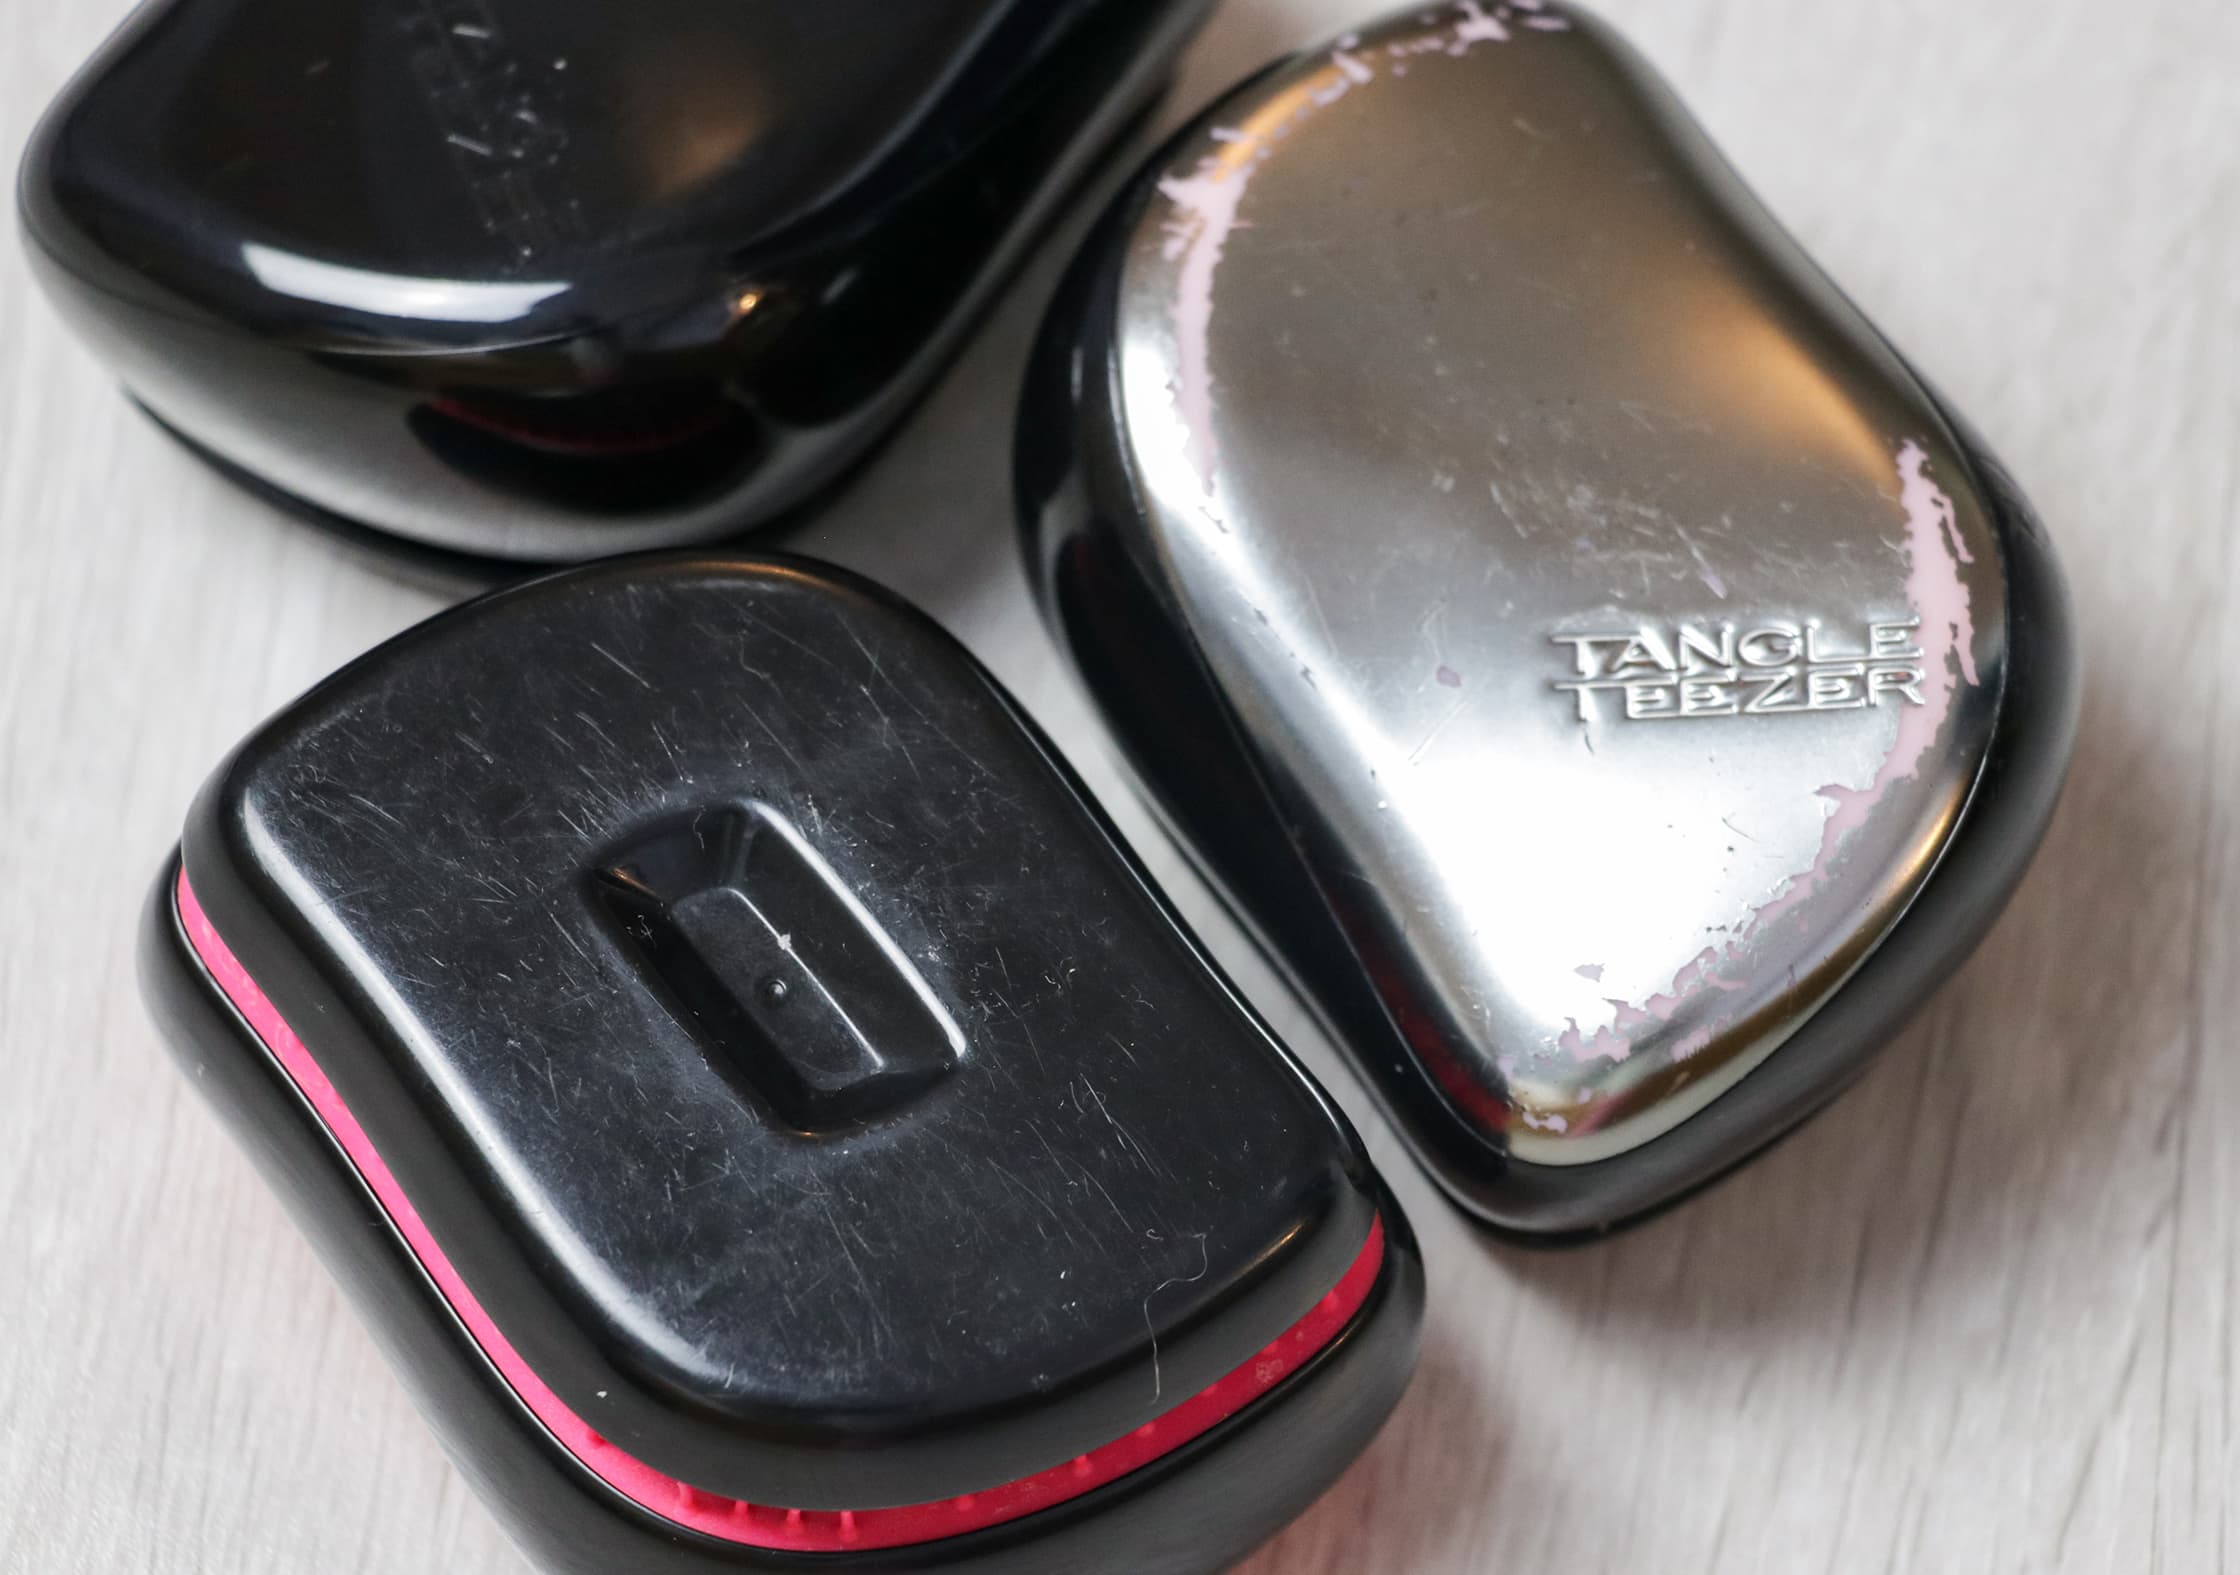 Aesthetic Blemishes On The Tangle Teezer Compact Styler